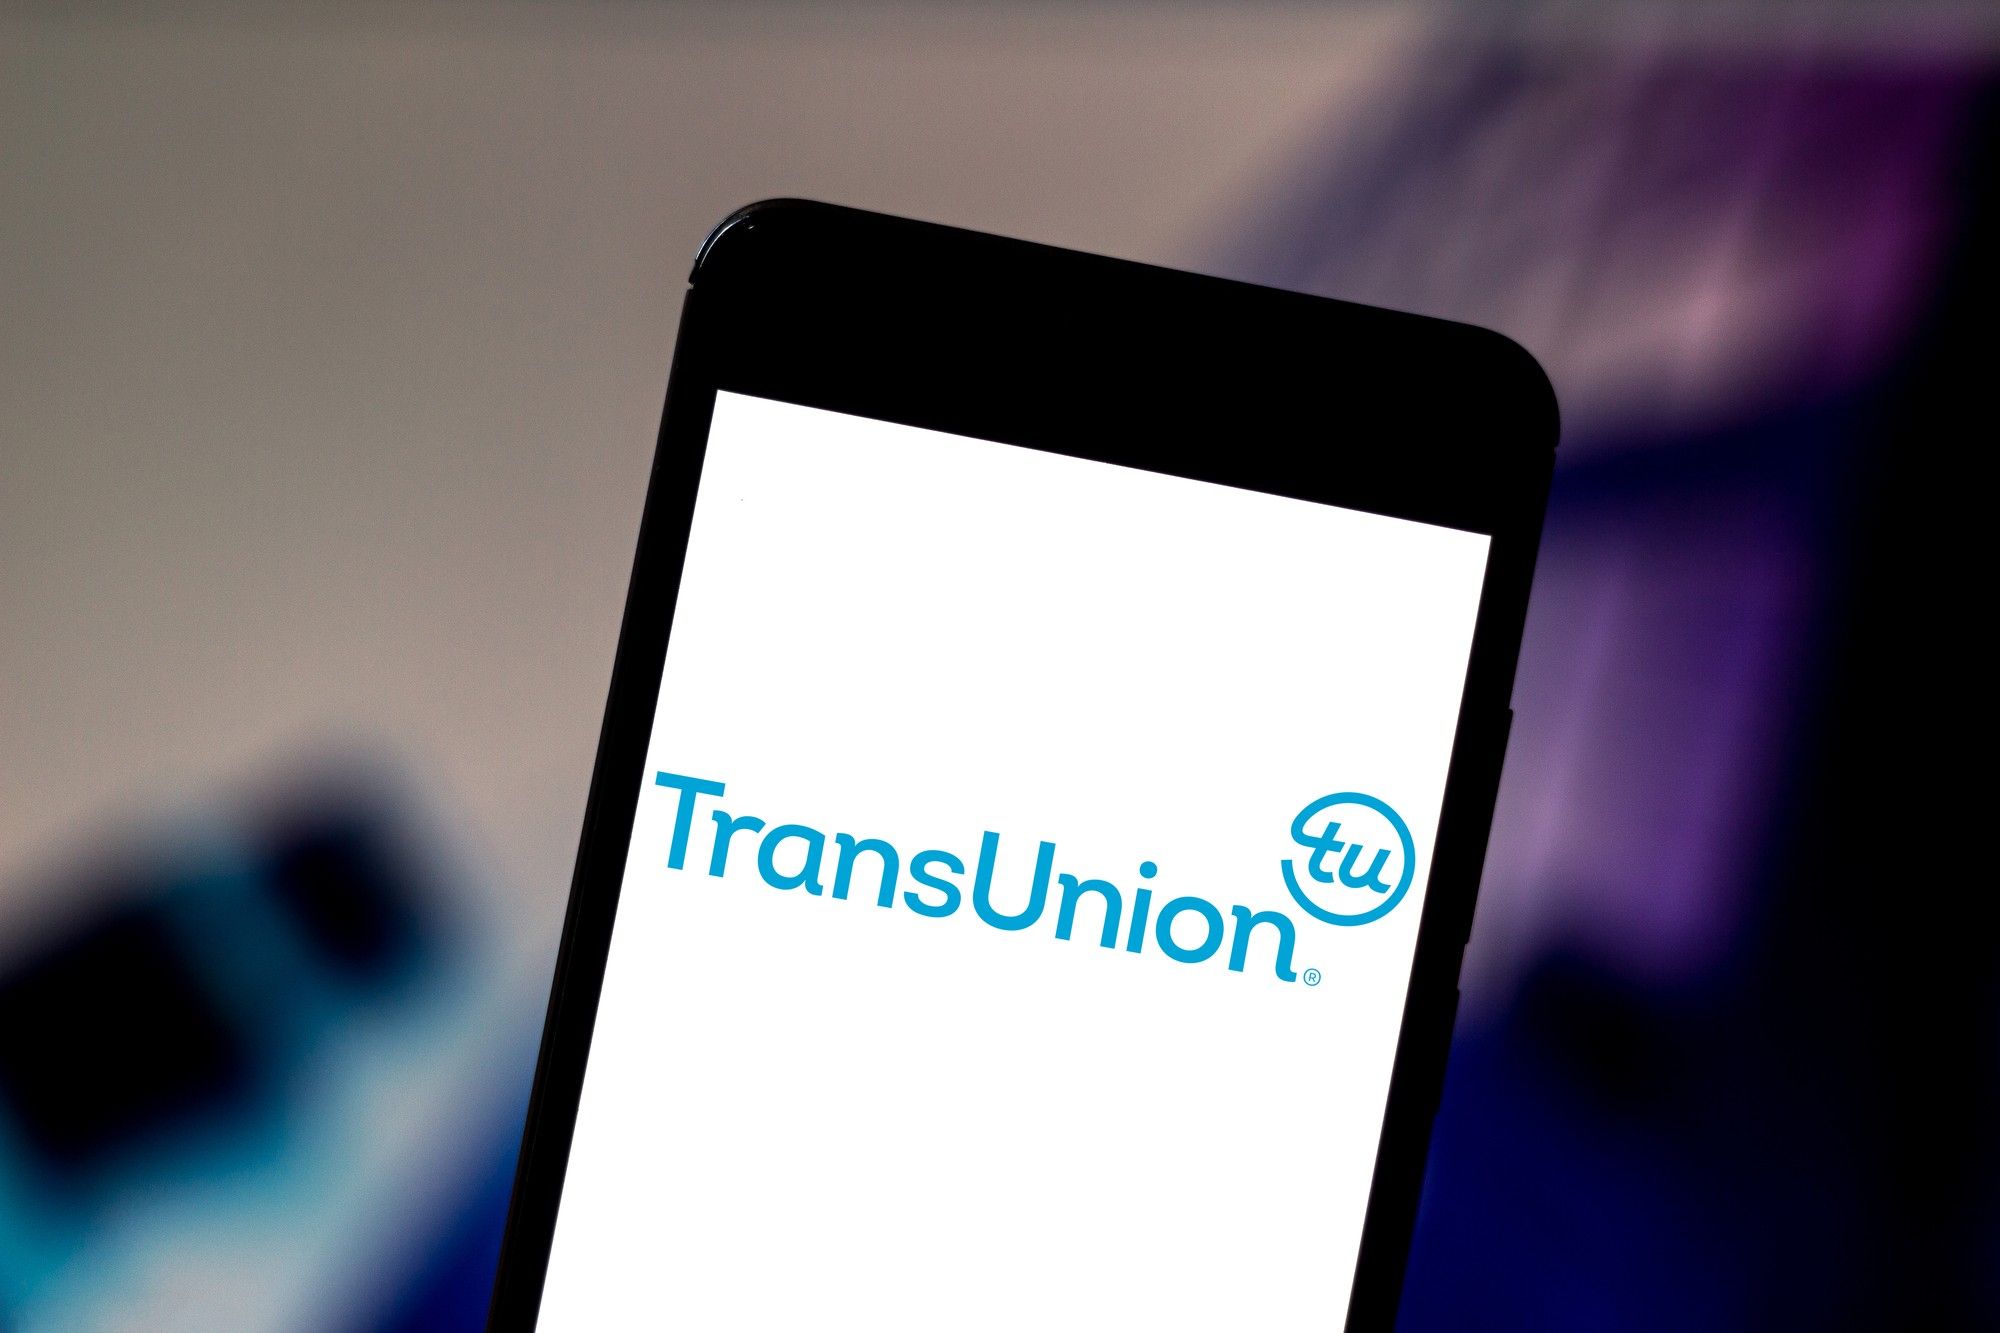 TransUnion credit report errors reportedly associated innocent consumers with terrorists.